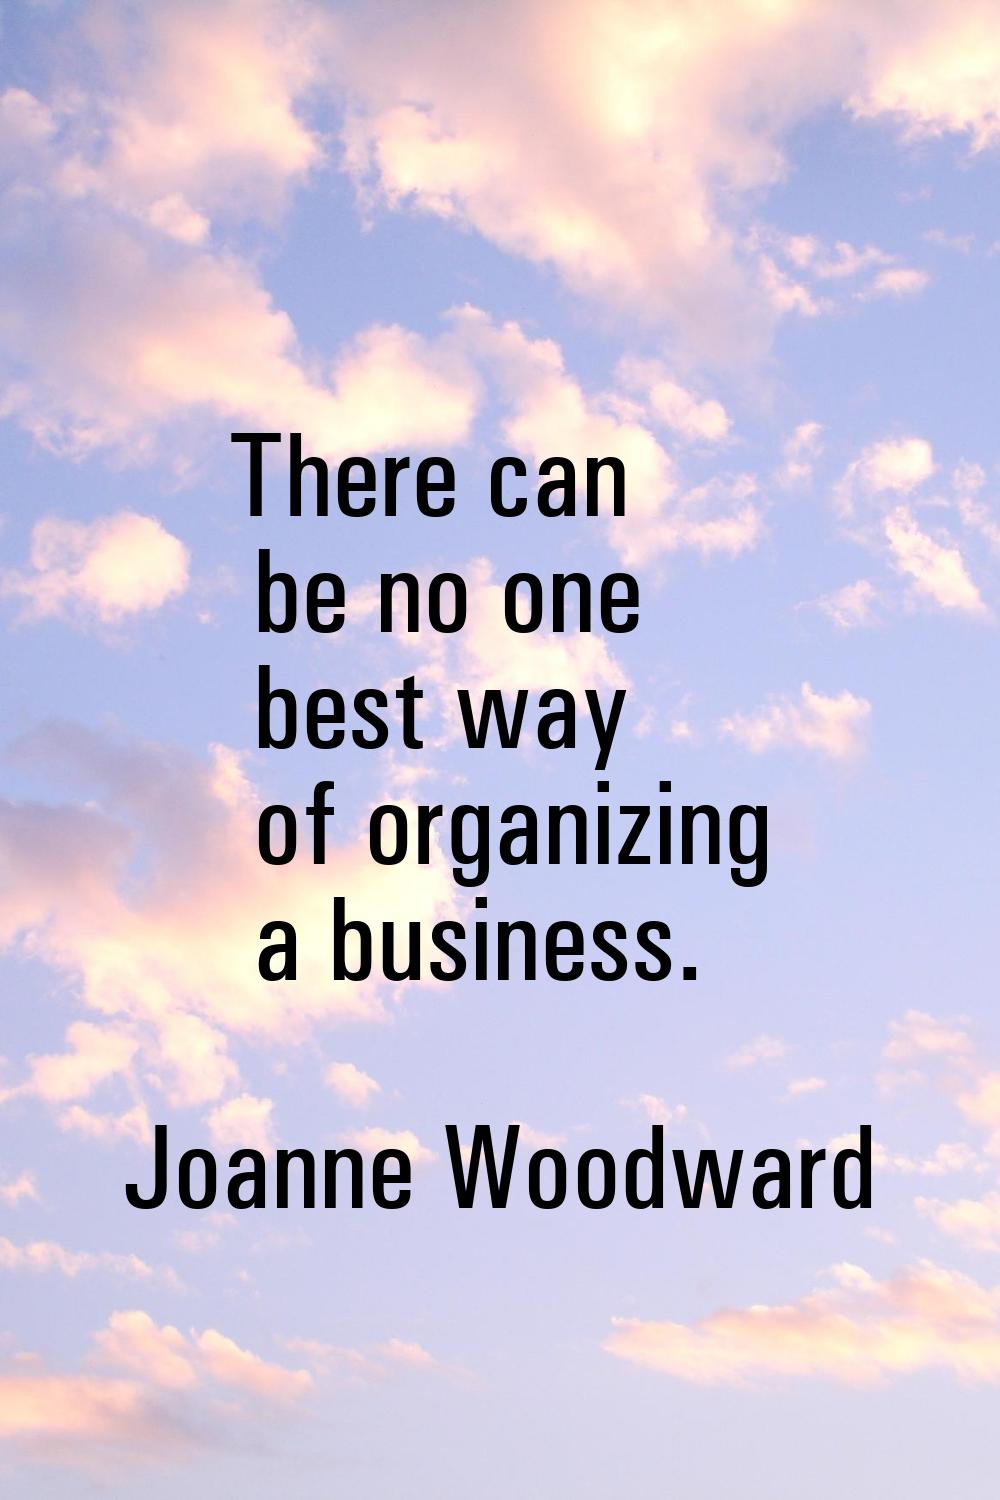 There can be no one best way of organizing a business.